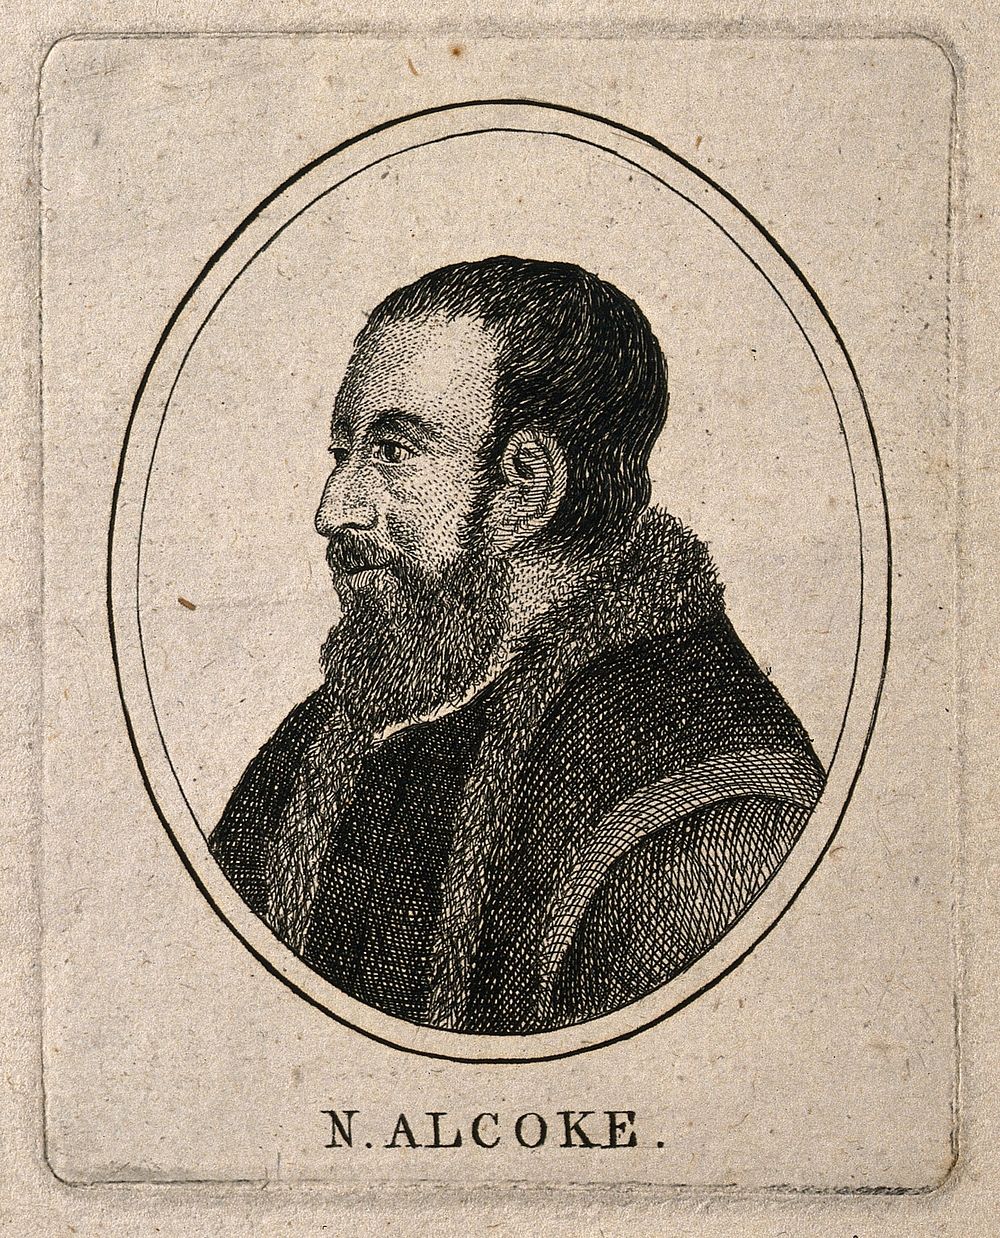 Nicholas Alcoke. Etching after B. Baron after H. Holbein.